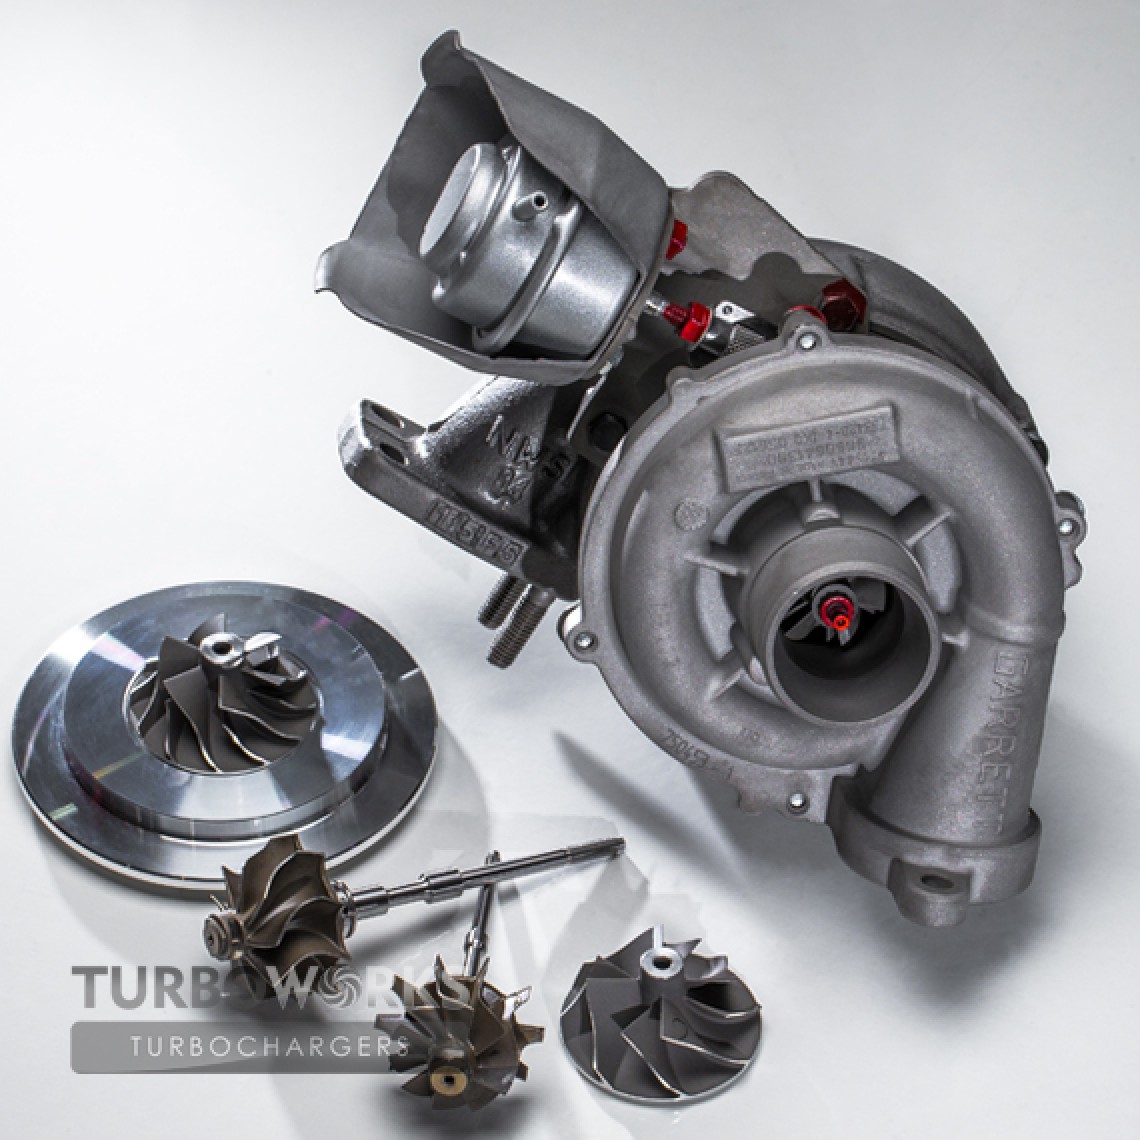 Turbocharger repairs and remanufacture in UK - Turbocharger specialists